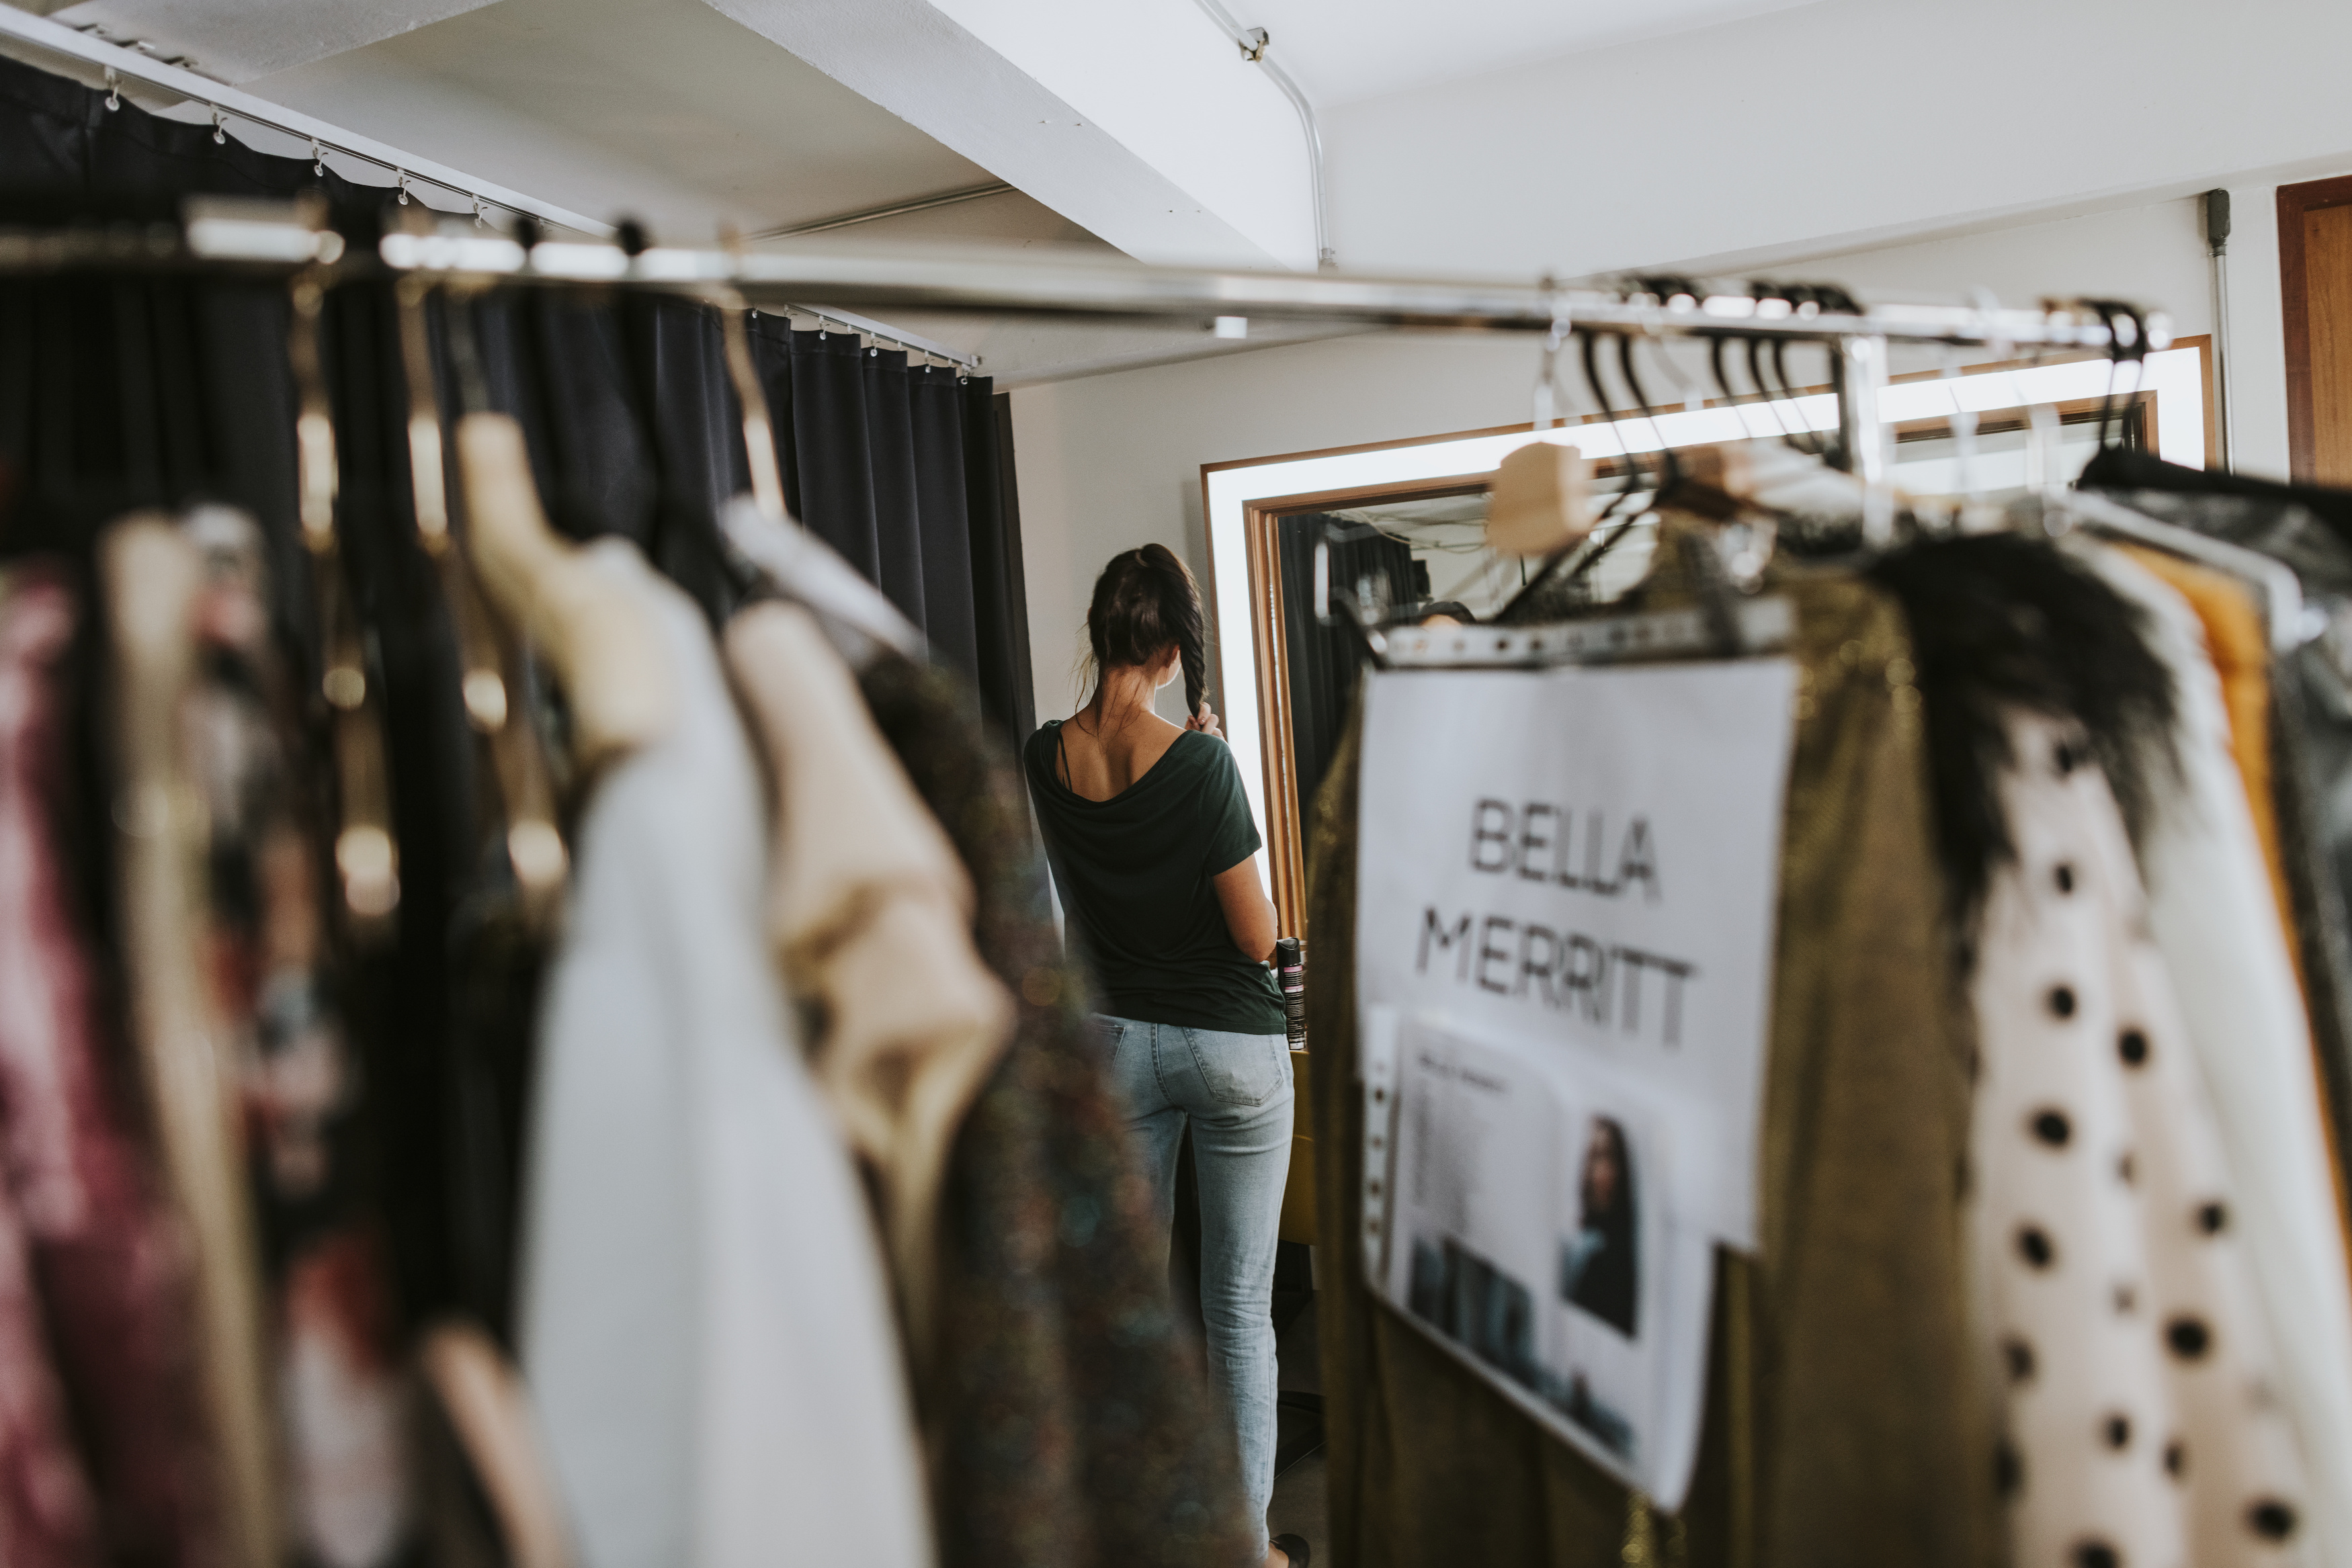 Fashion Stylist Jobs - The Ins and Outs of a Fashion Stylist